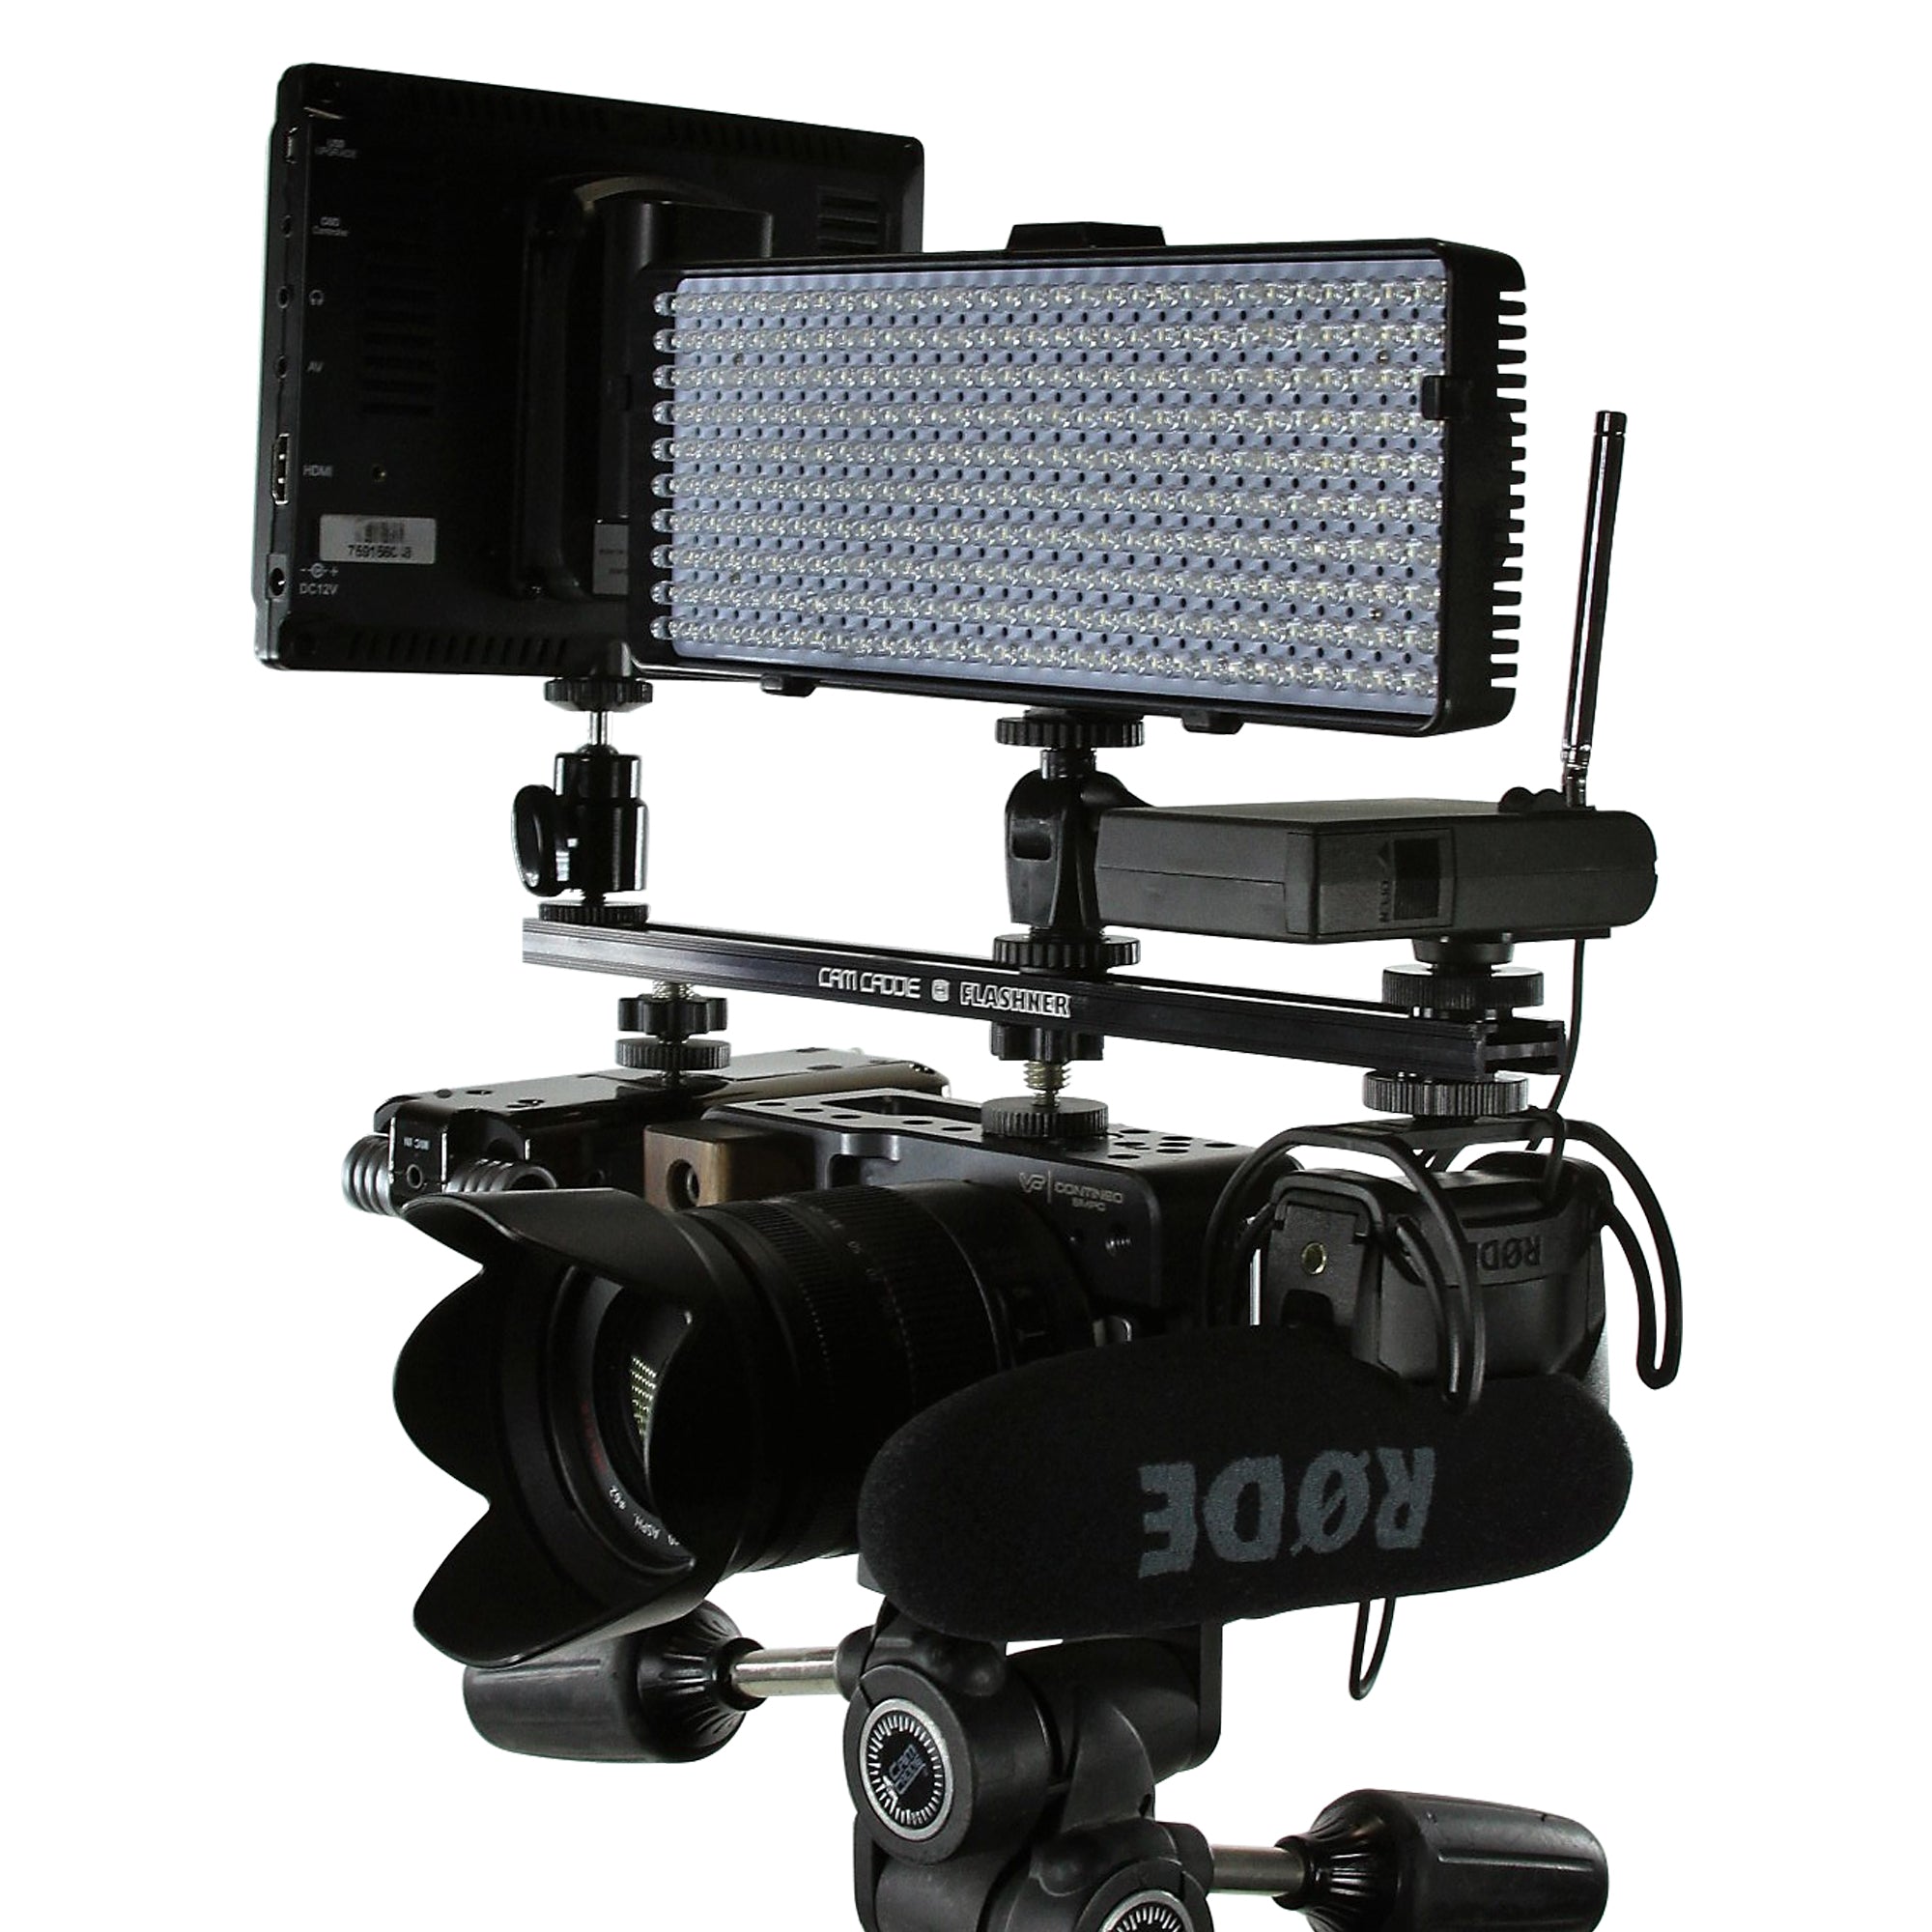 Cold Shoe Adapter for Camera Accessories Microphone, LED Light, EVF - CamCaddie.com